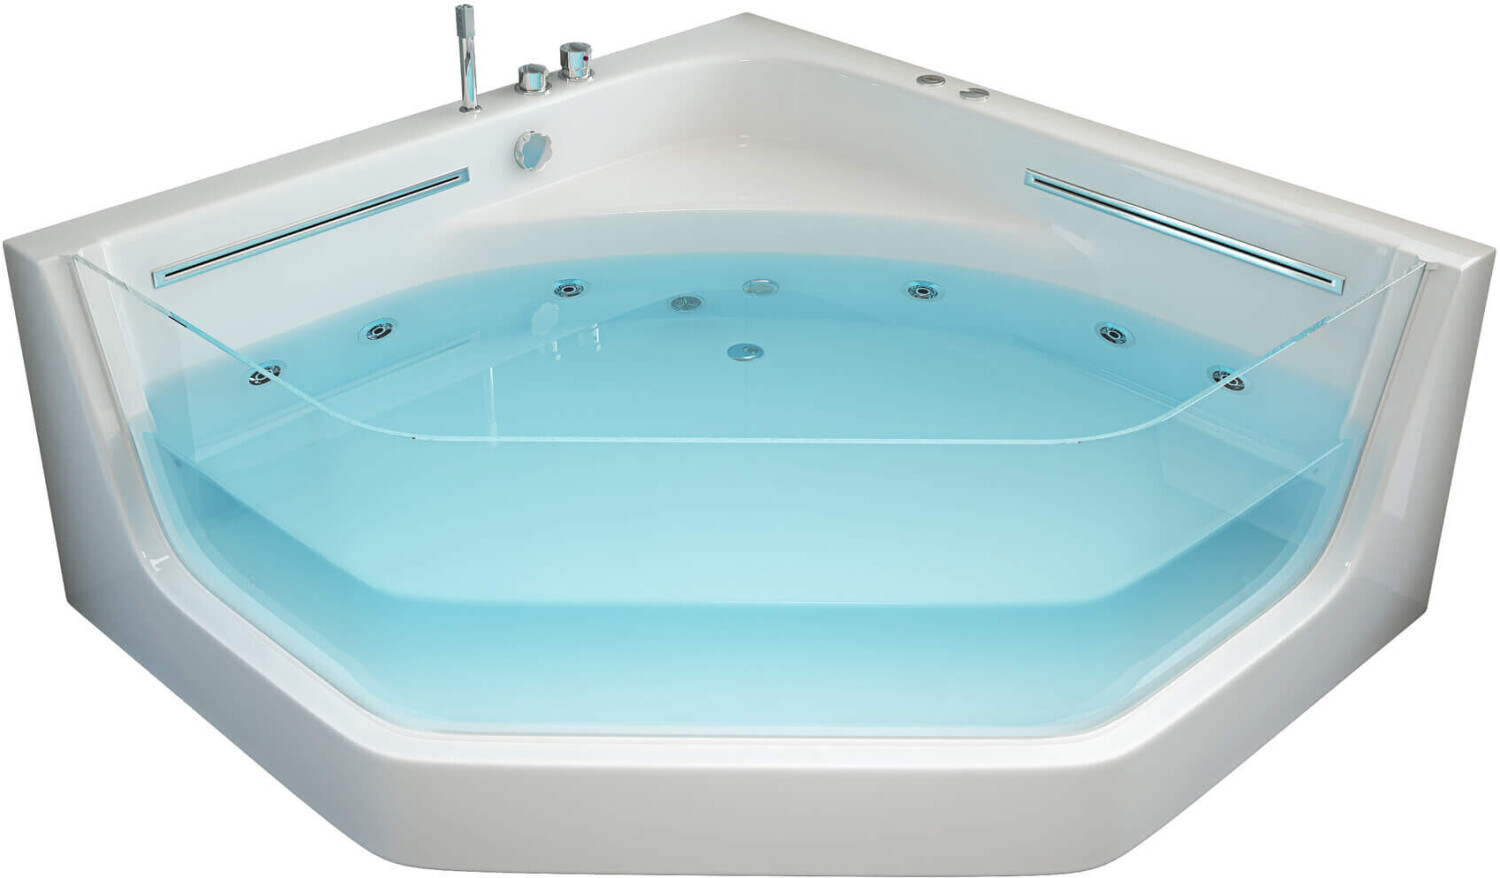 Home Deluxe Whirlpool PACIFICO 150 x 150 x 55 cm ab 1.249,00